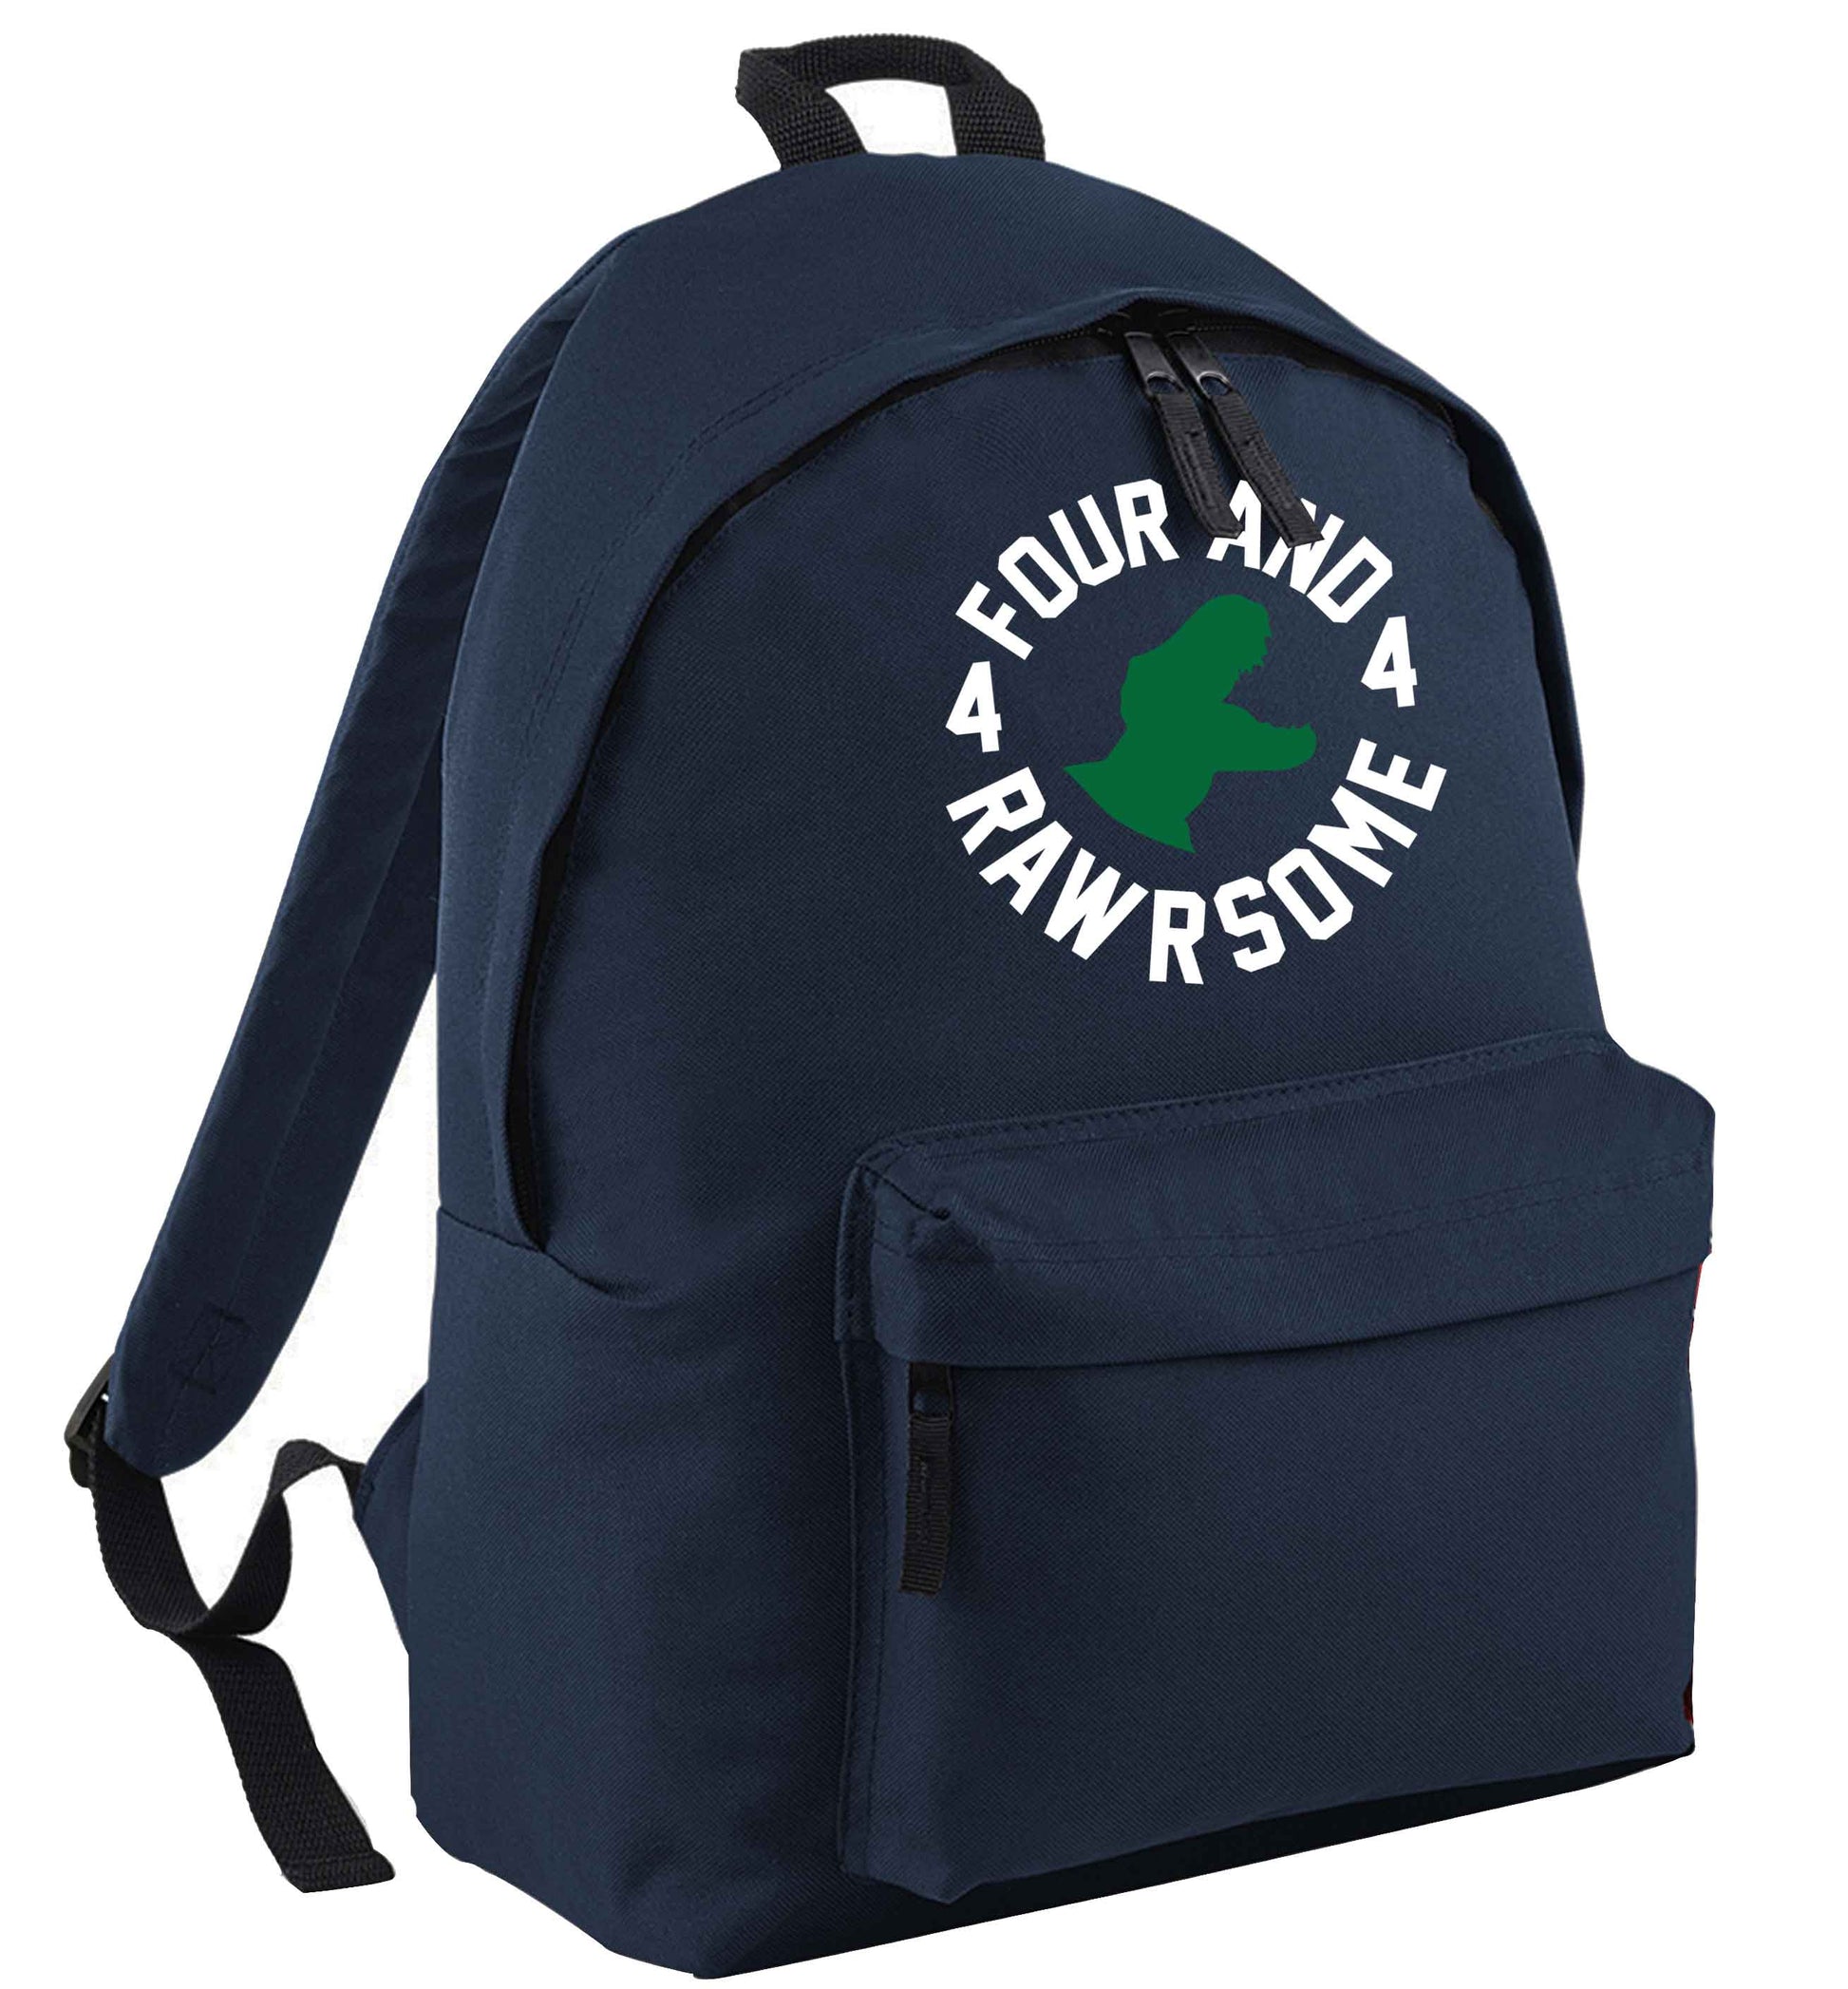 Four and rawrsome navy adults backpack